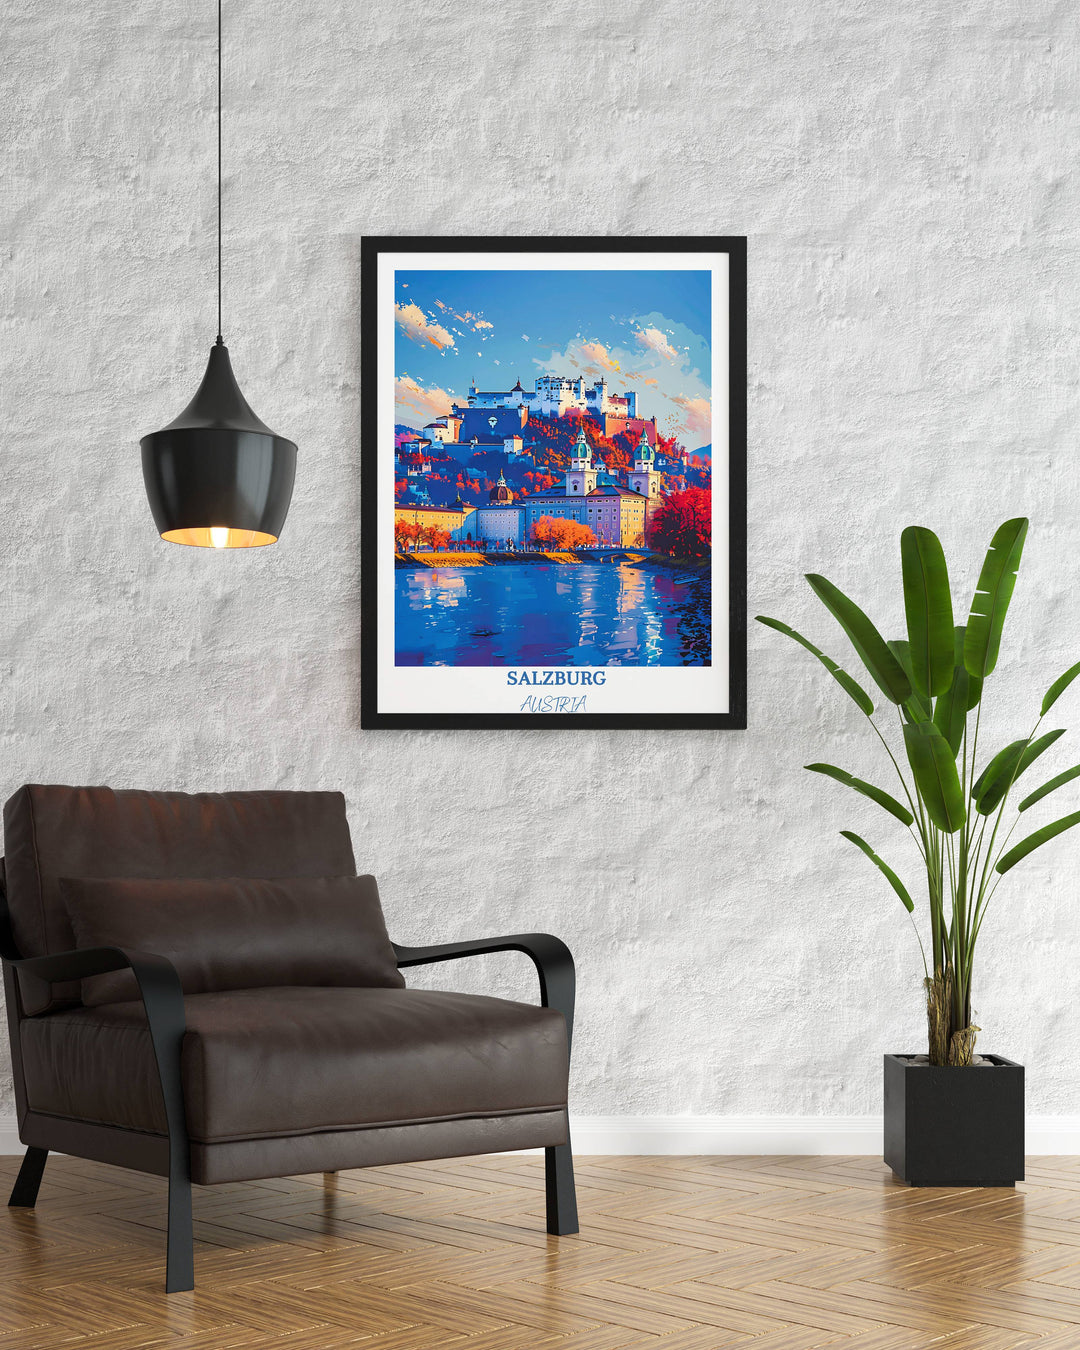 Add a touch of Salzburgs magic to your home decor with this enchanting art print of Hohensalzburg Castle. A thoughtful gift for any occasion.